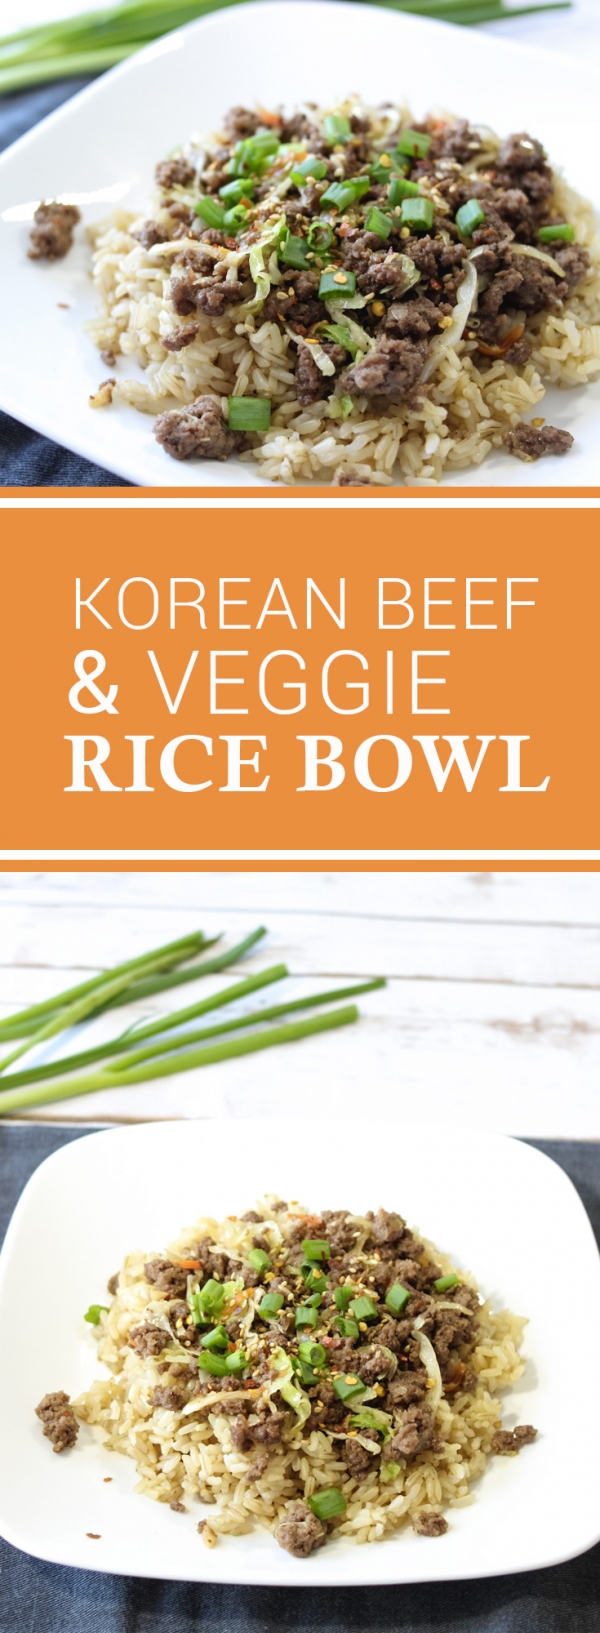 Korean Beef and Veggies | Rice Bowls & Lettuce Wraps - Mommy Gone ...